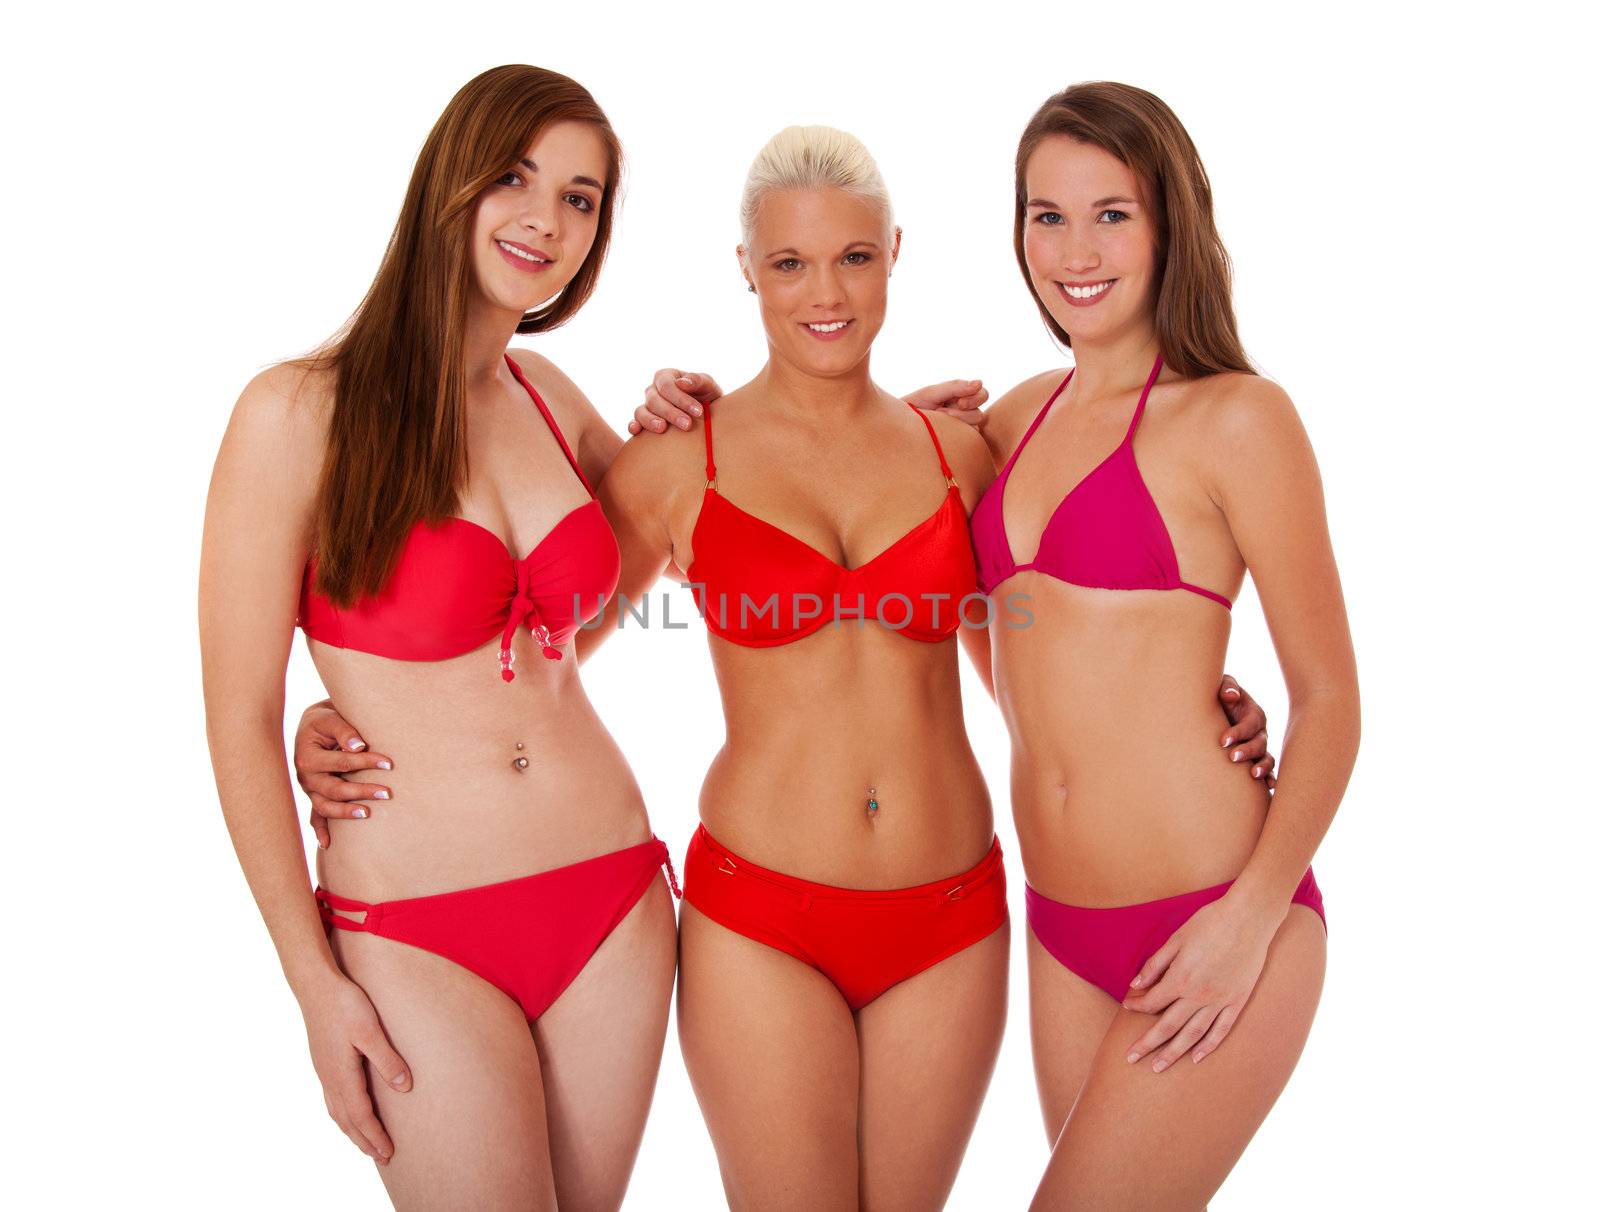 Three beautiful young woman in bikini standing next to each other. All on white background.